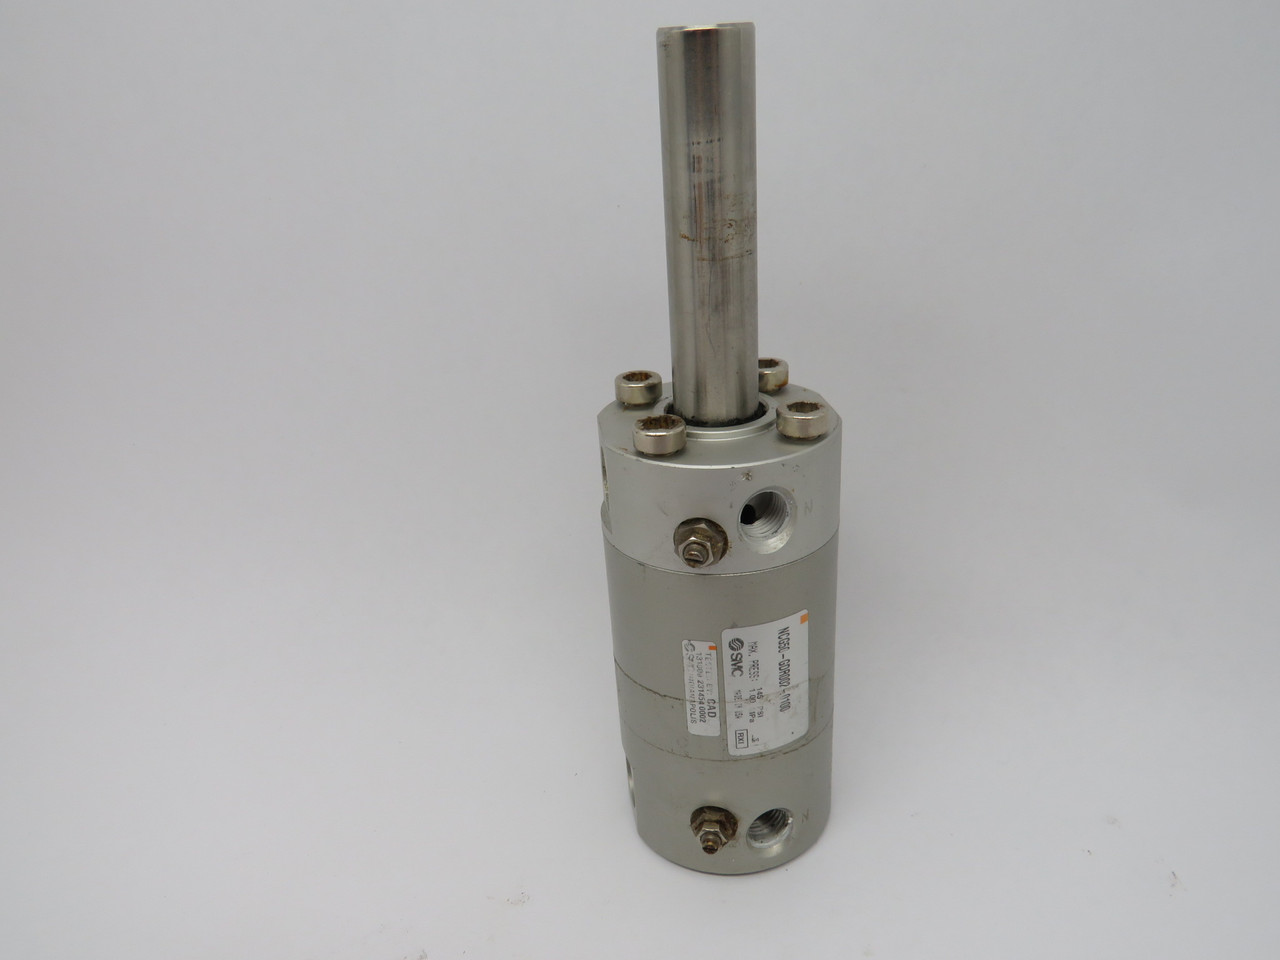 SMC NCG50-GDR002-0100 Pneumatic Cylinder 50mm Bore 100mm Stroke *Some Rust* USED